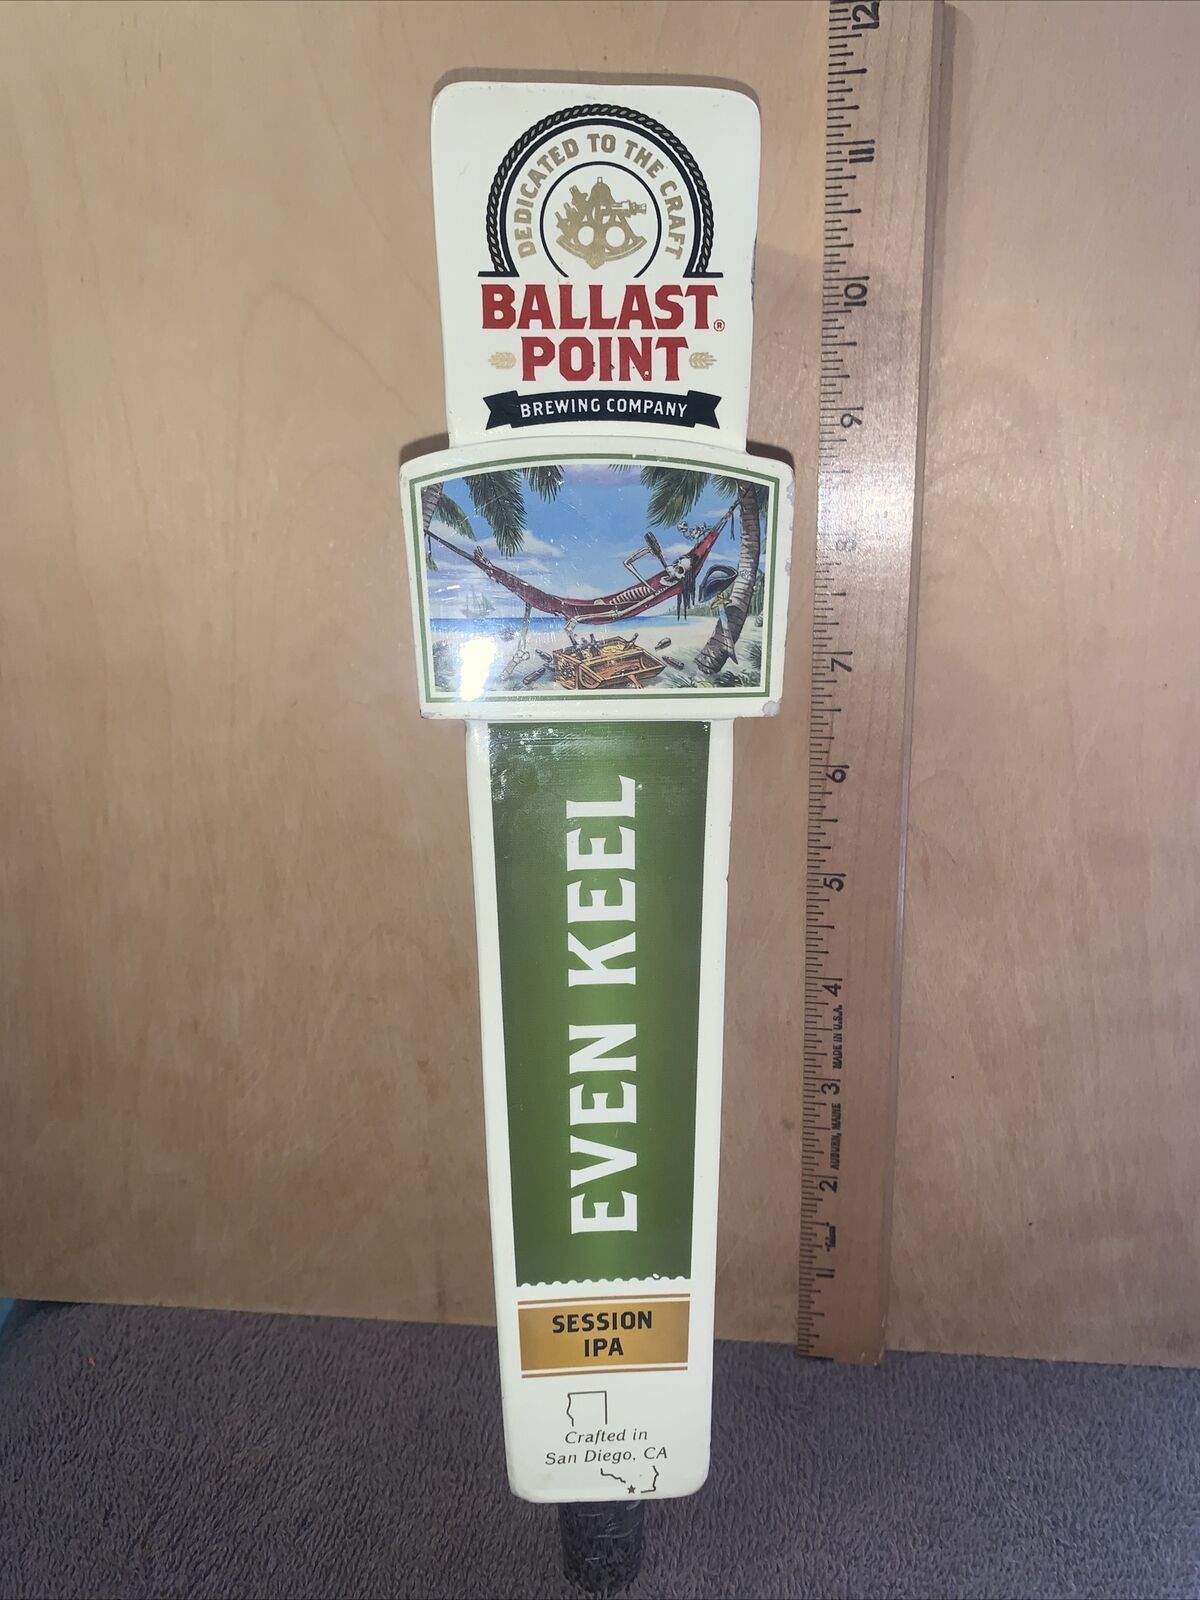 Ballast Point Brewing Co. Craft Beer - Tap Handle - Used. San Diego, Ca